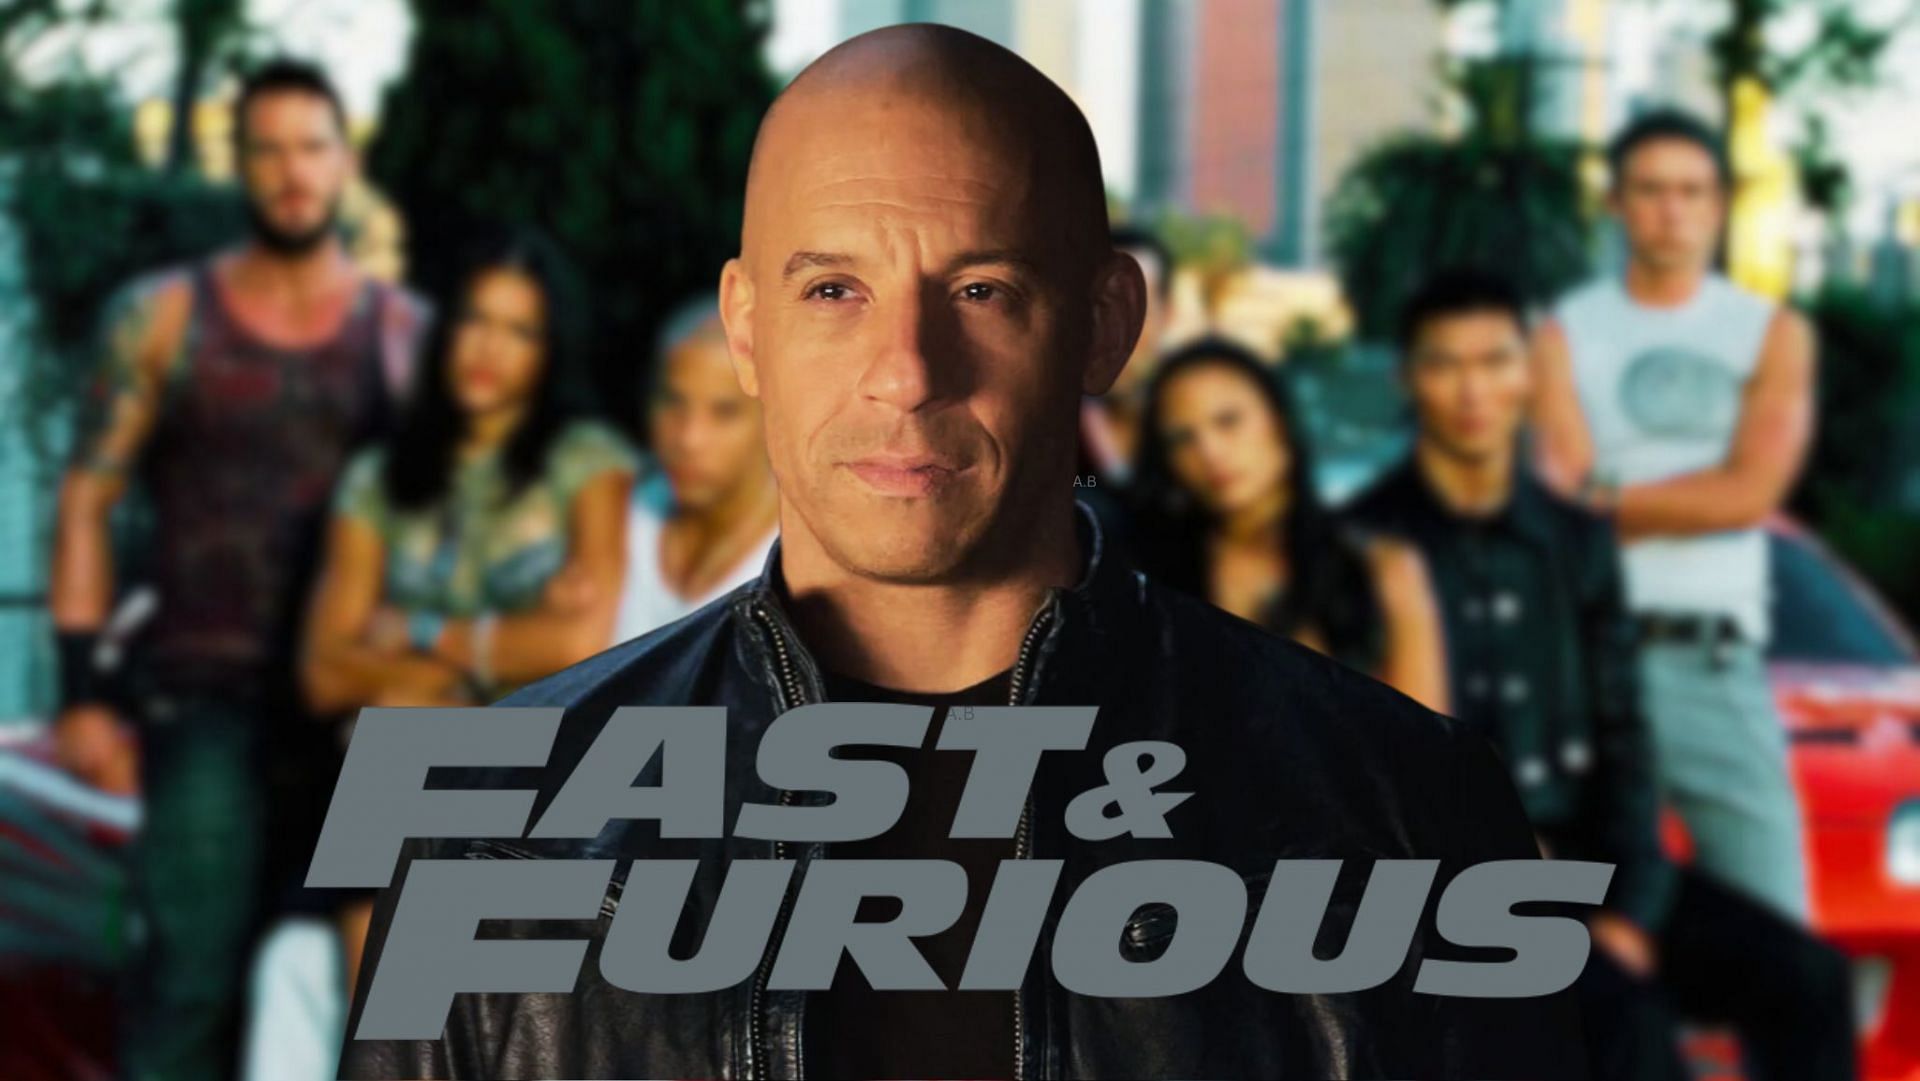 Fast & Furious 11: Release date, cast, and what we know so far